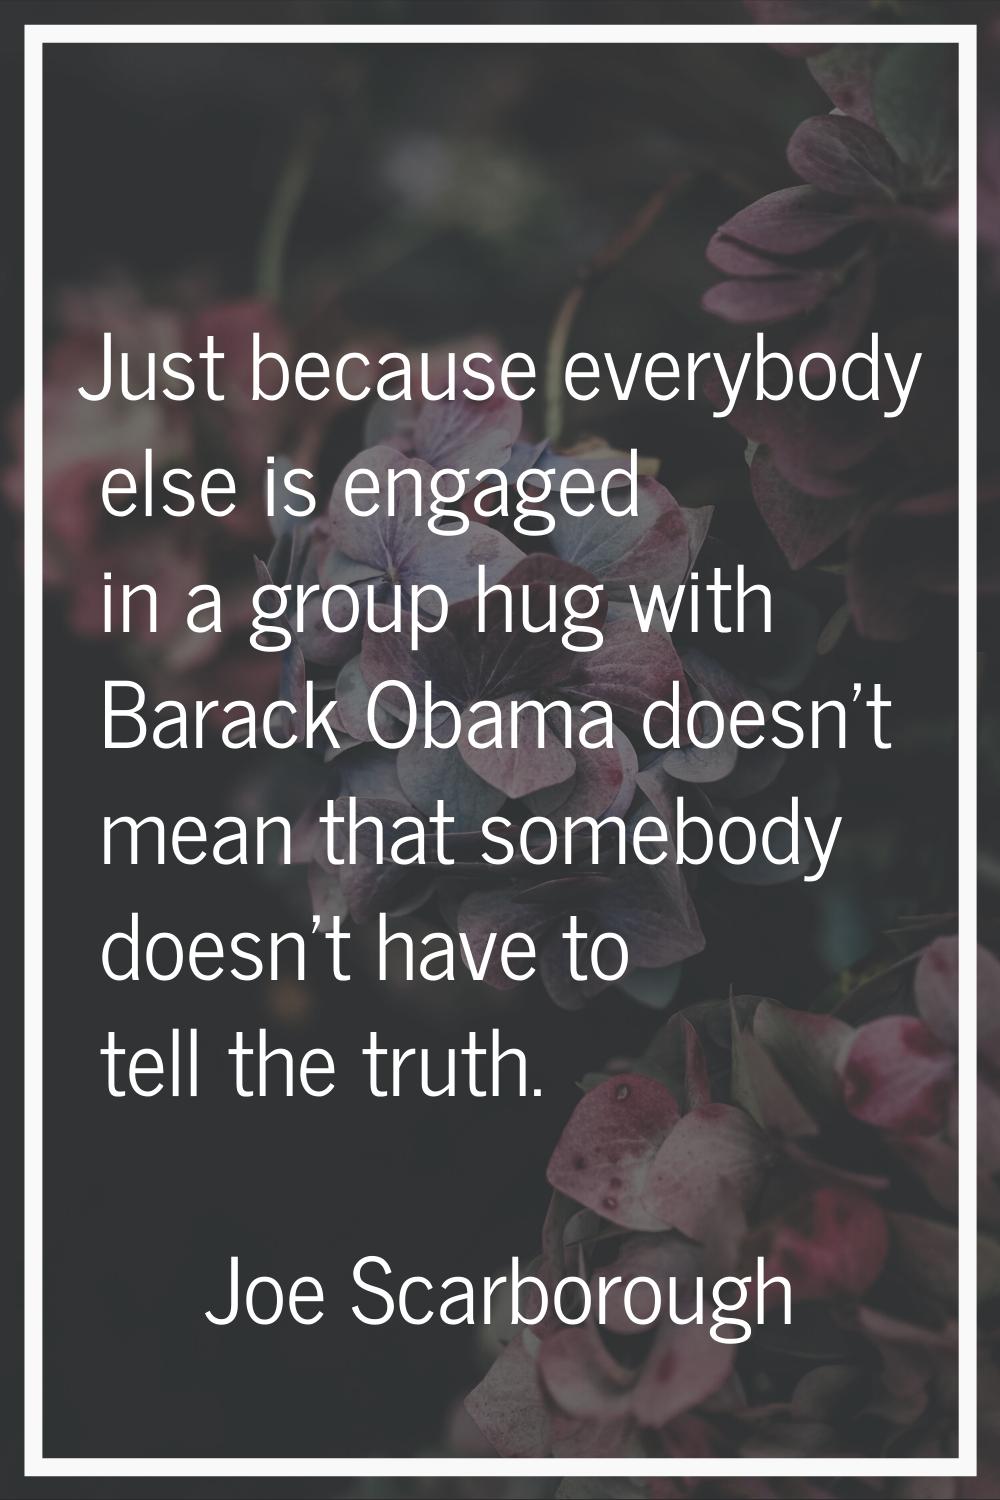 Just because everybody else is engaged in a group hug with Barack Obama doesn't mean that somebody 